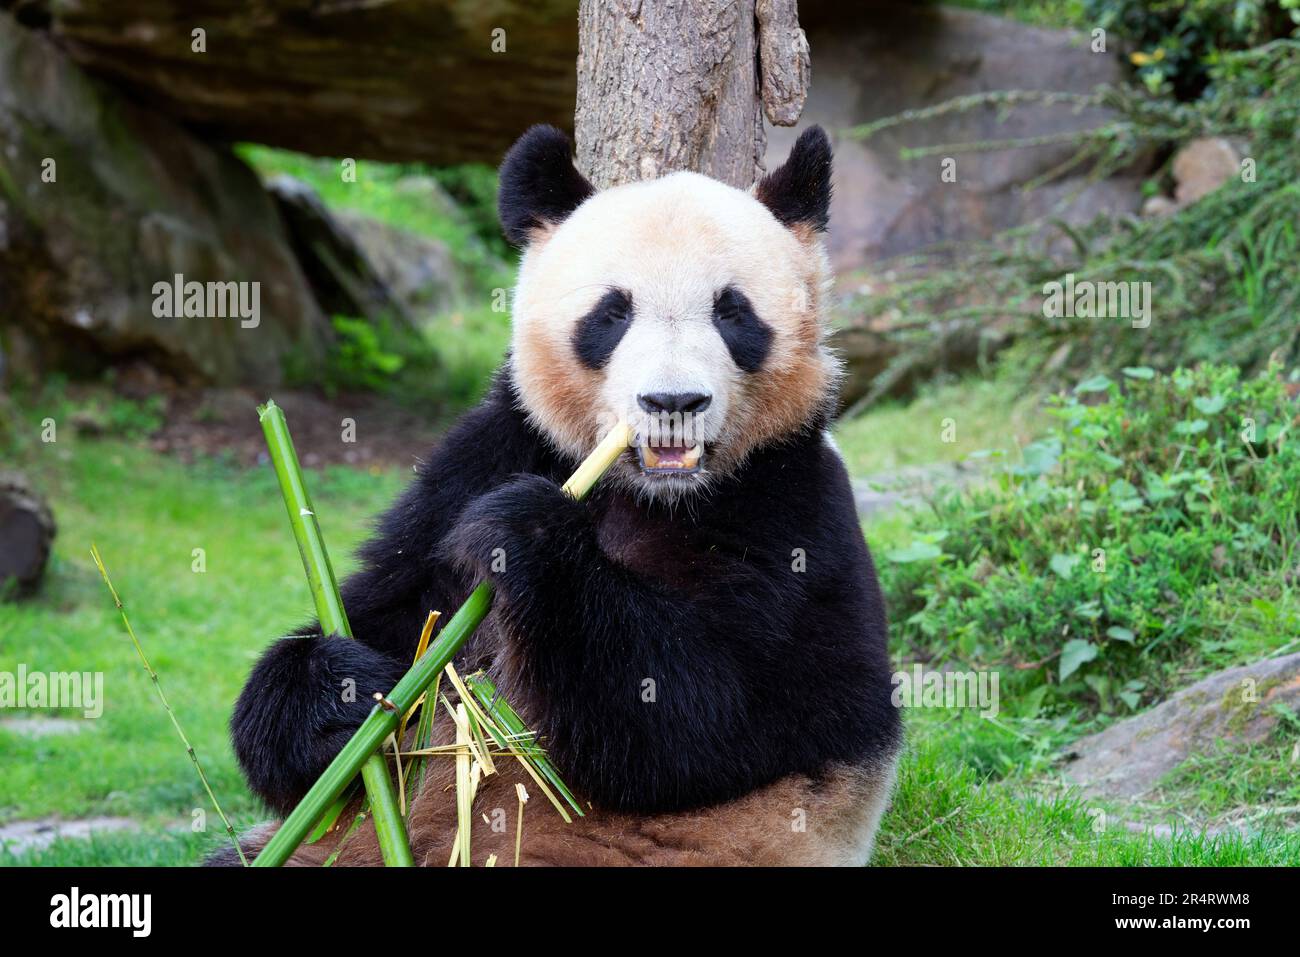 Panda eating bamboo in a zoo, France Stock Photo